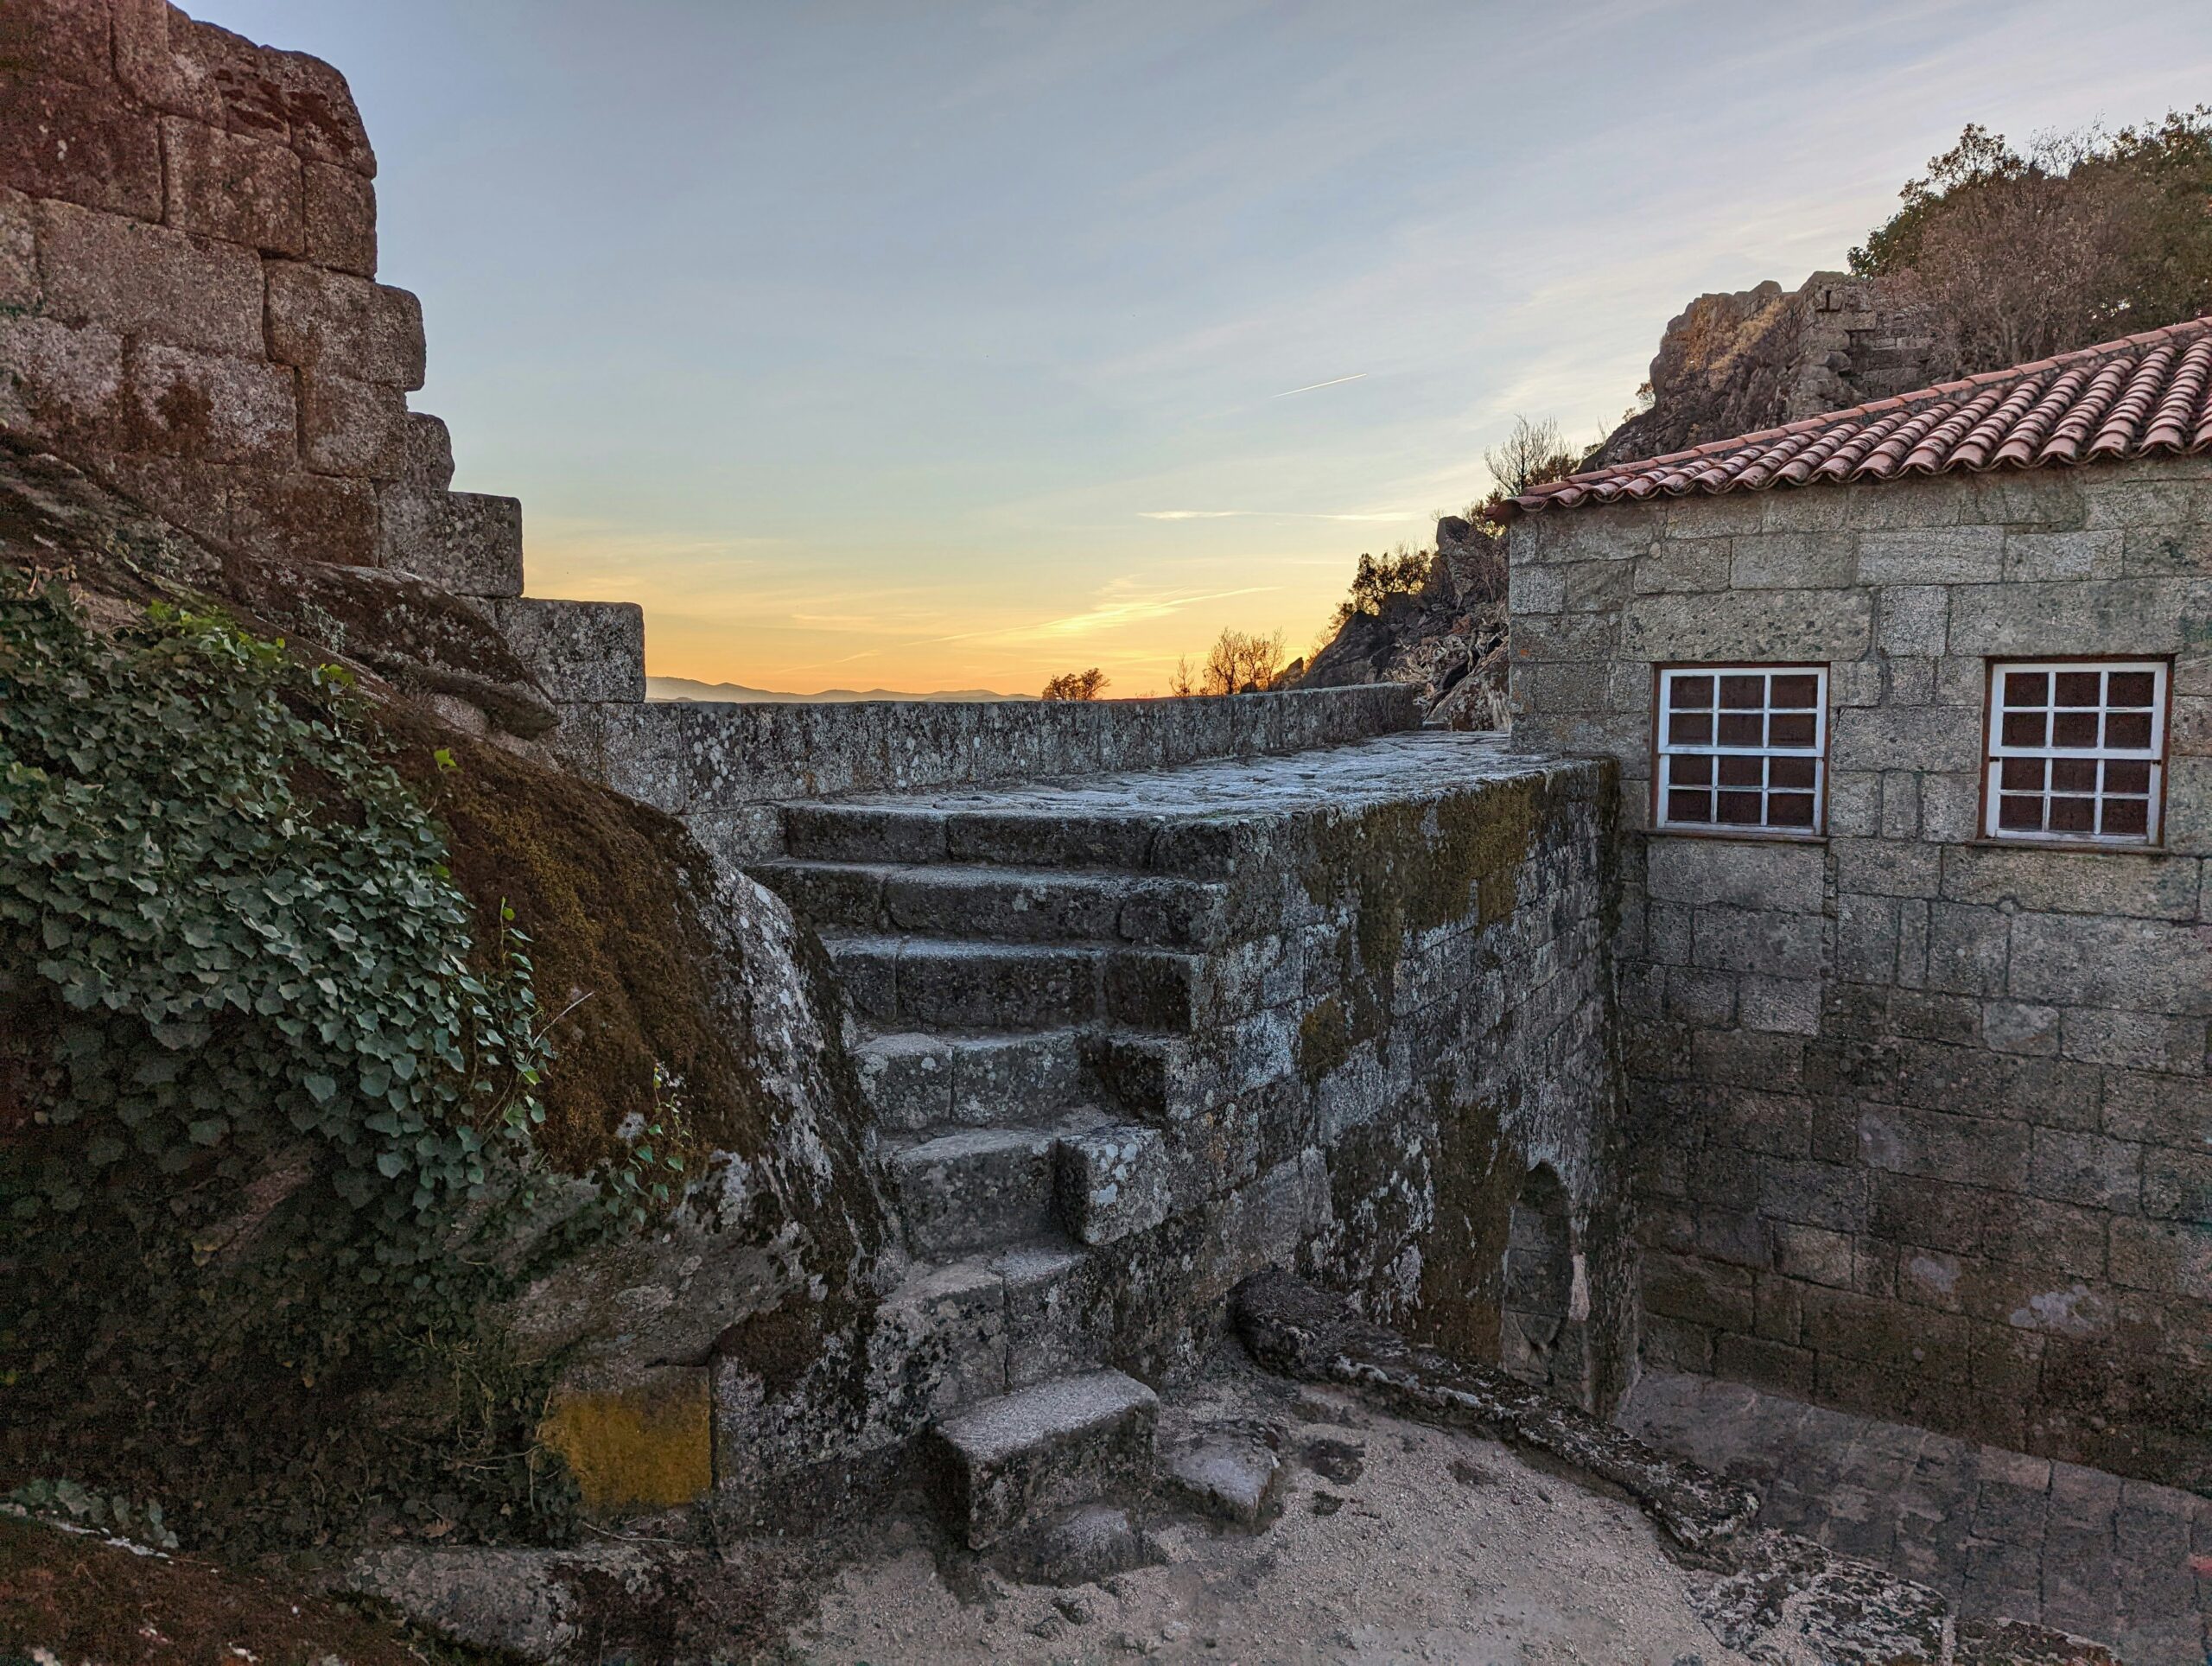 Many scenes of the movie Damsel were filmed in Portugal. Check out exactly where travelers can see the stunning views from the movie. 
pictured: an old staircase made of stones overlooking the mountains of Portugal. 